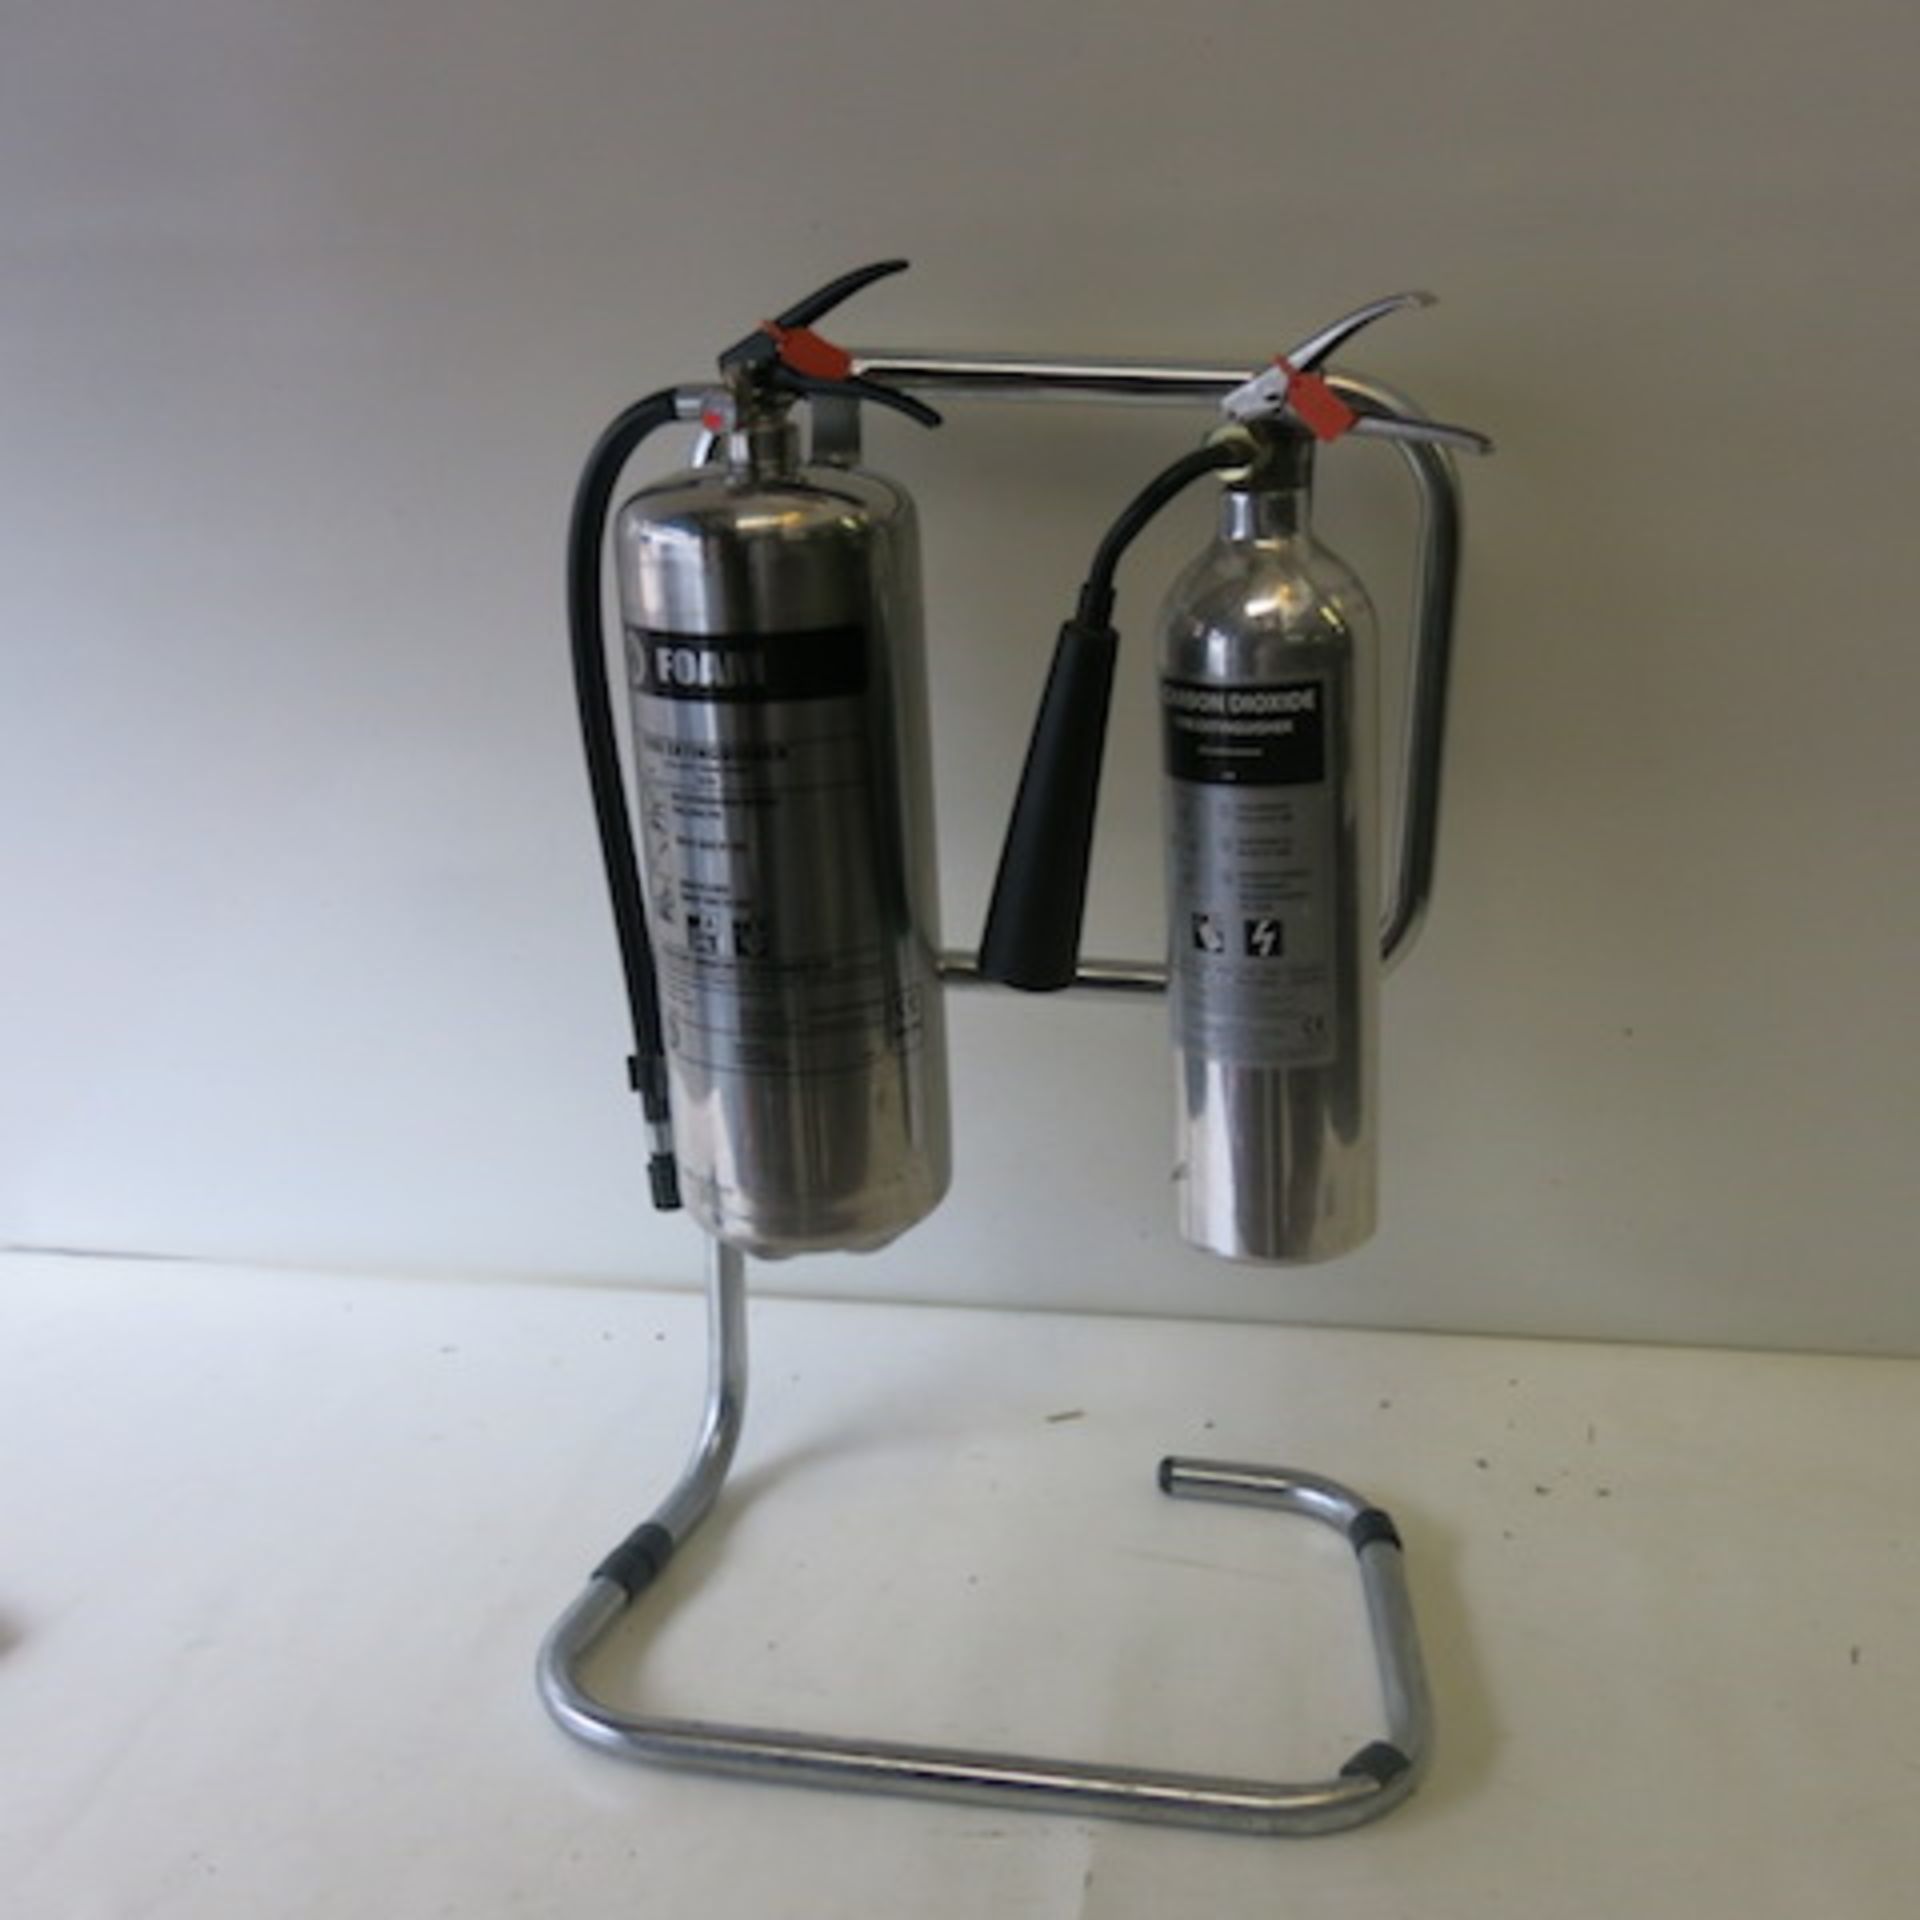 2 x Stainless Steel/Polished Aluminum Fire Extinguishers on Frame, 1 Foam, 1 Carbon Dioxide,